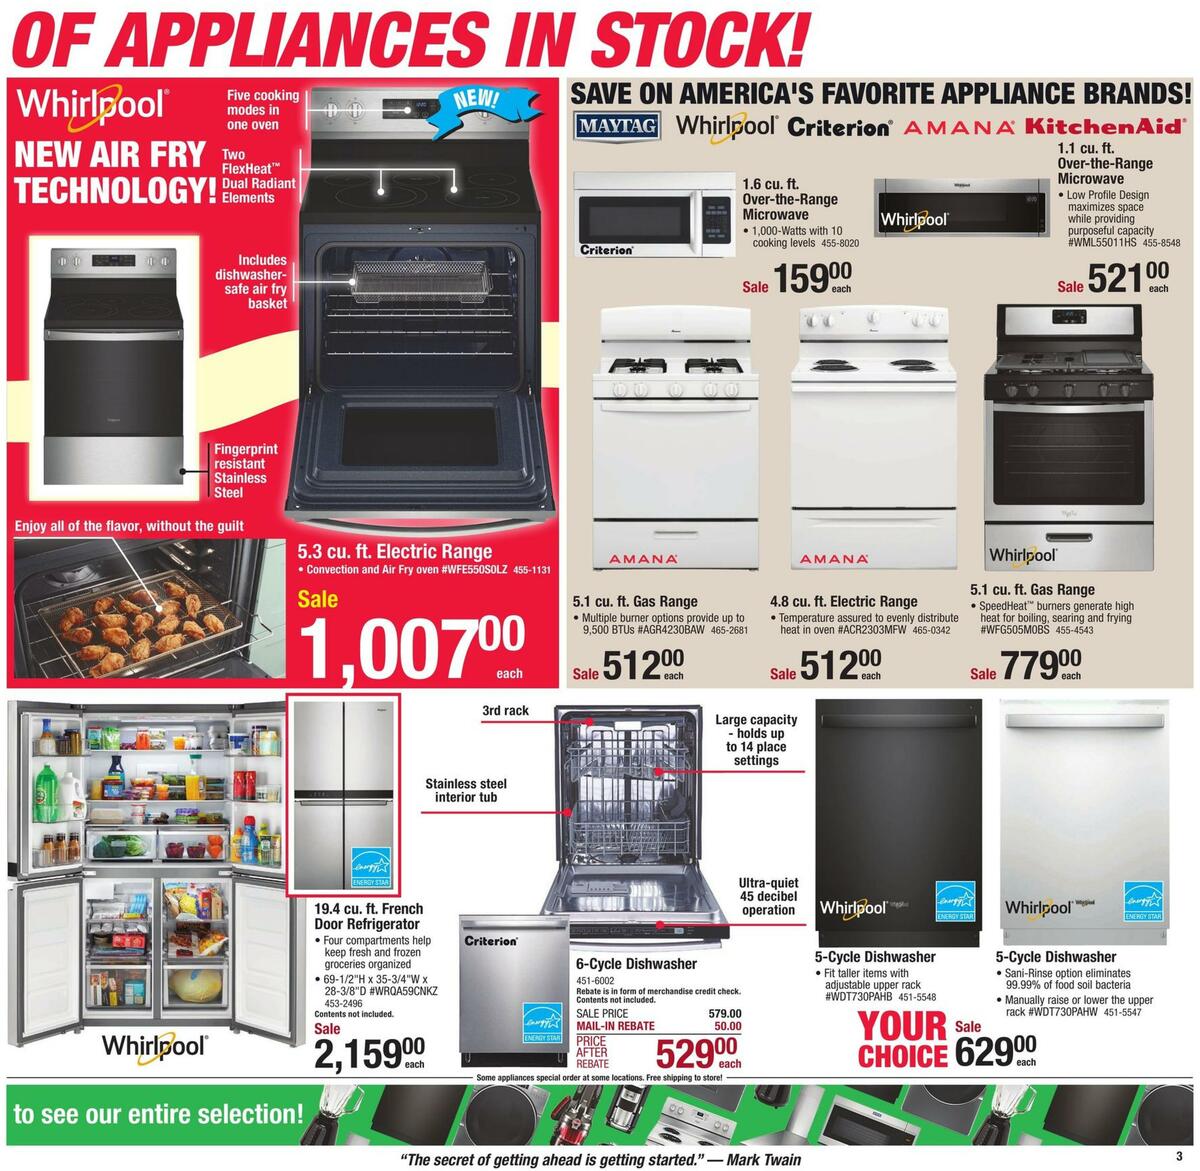 Menards Weekly Ad from January 2